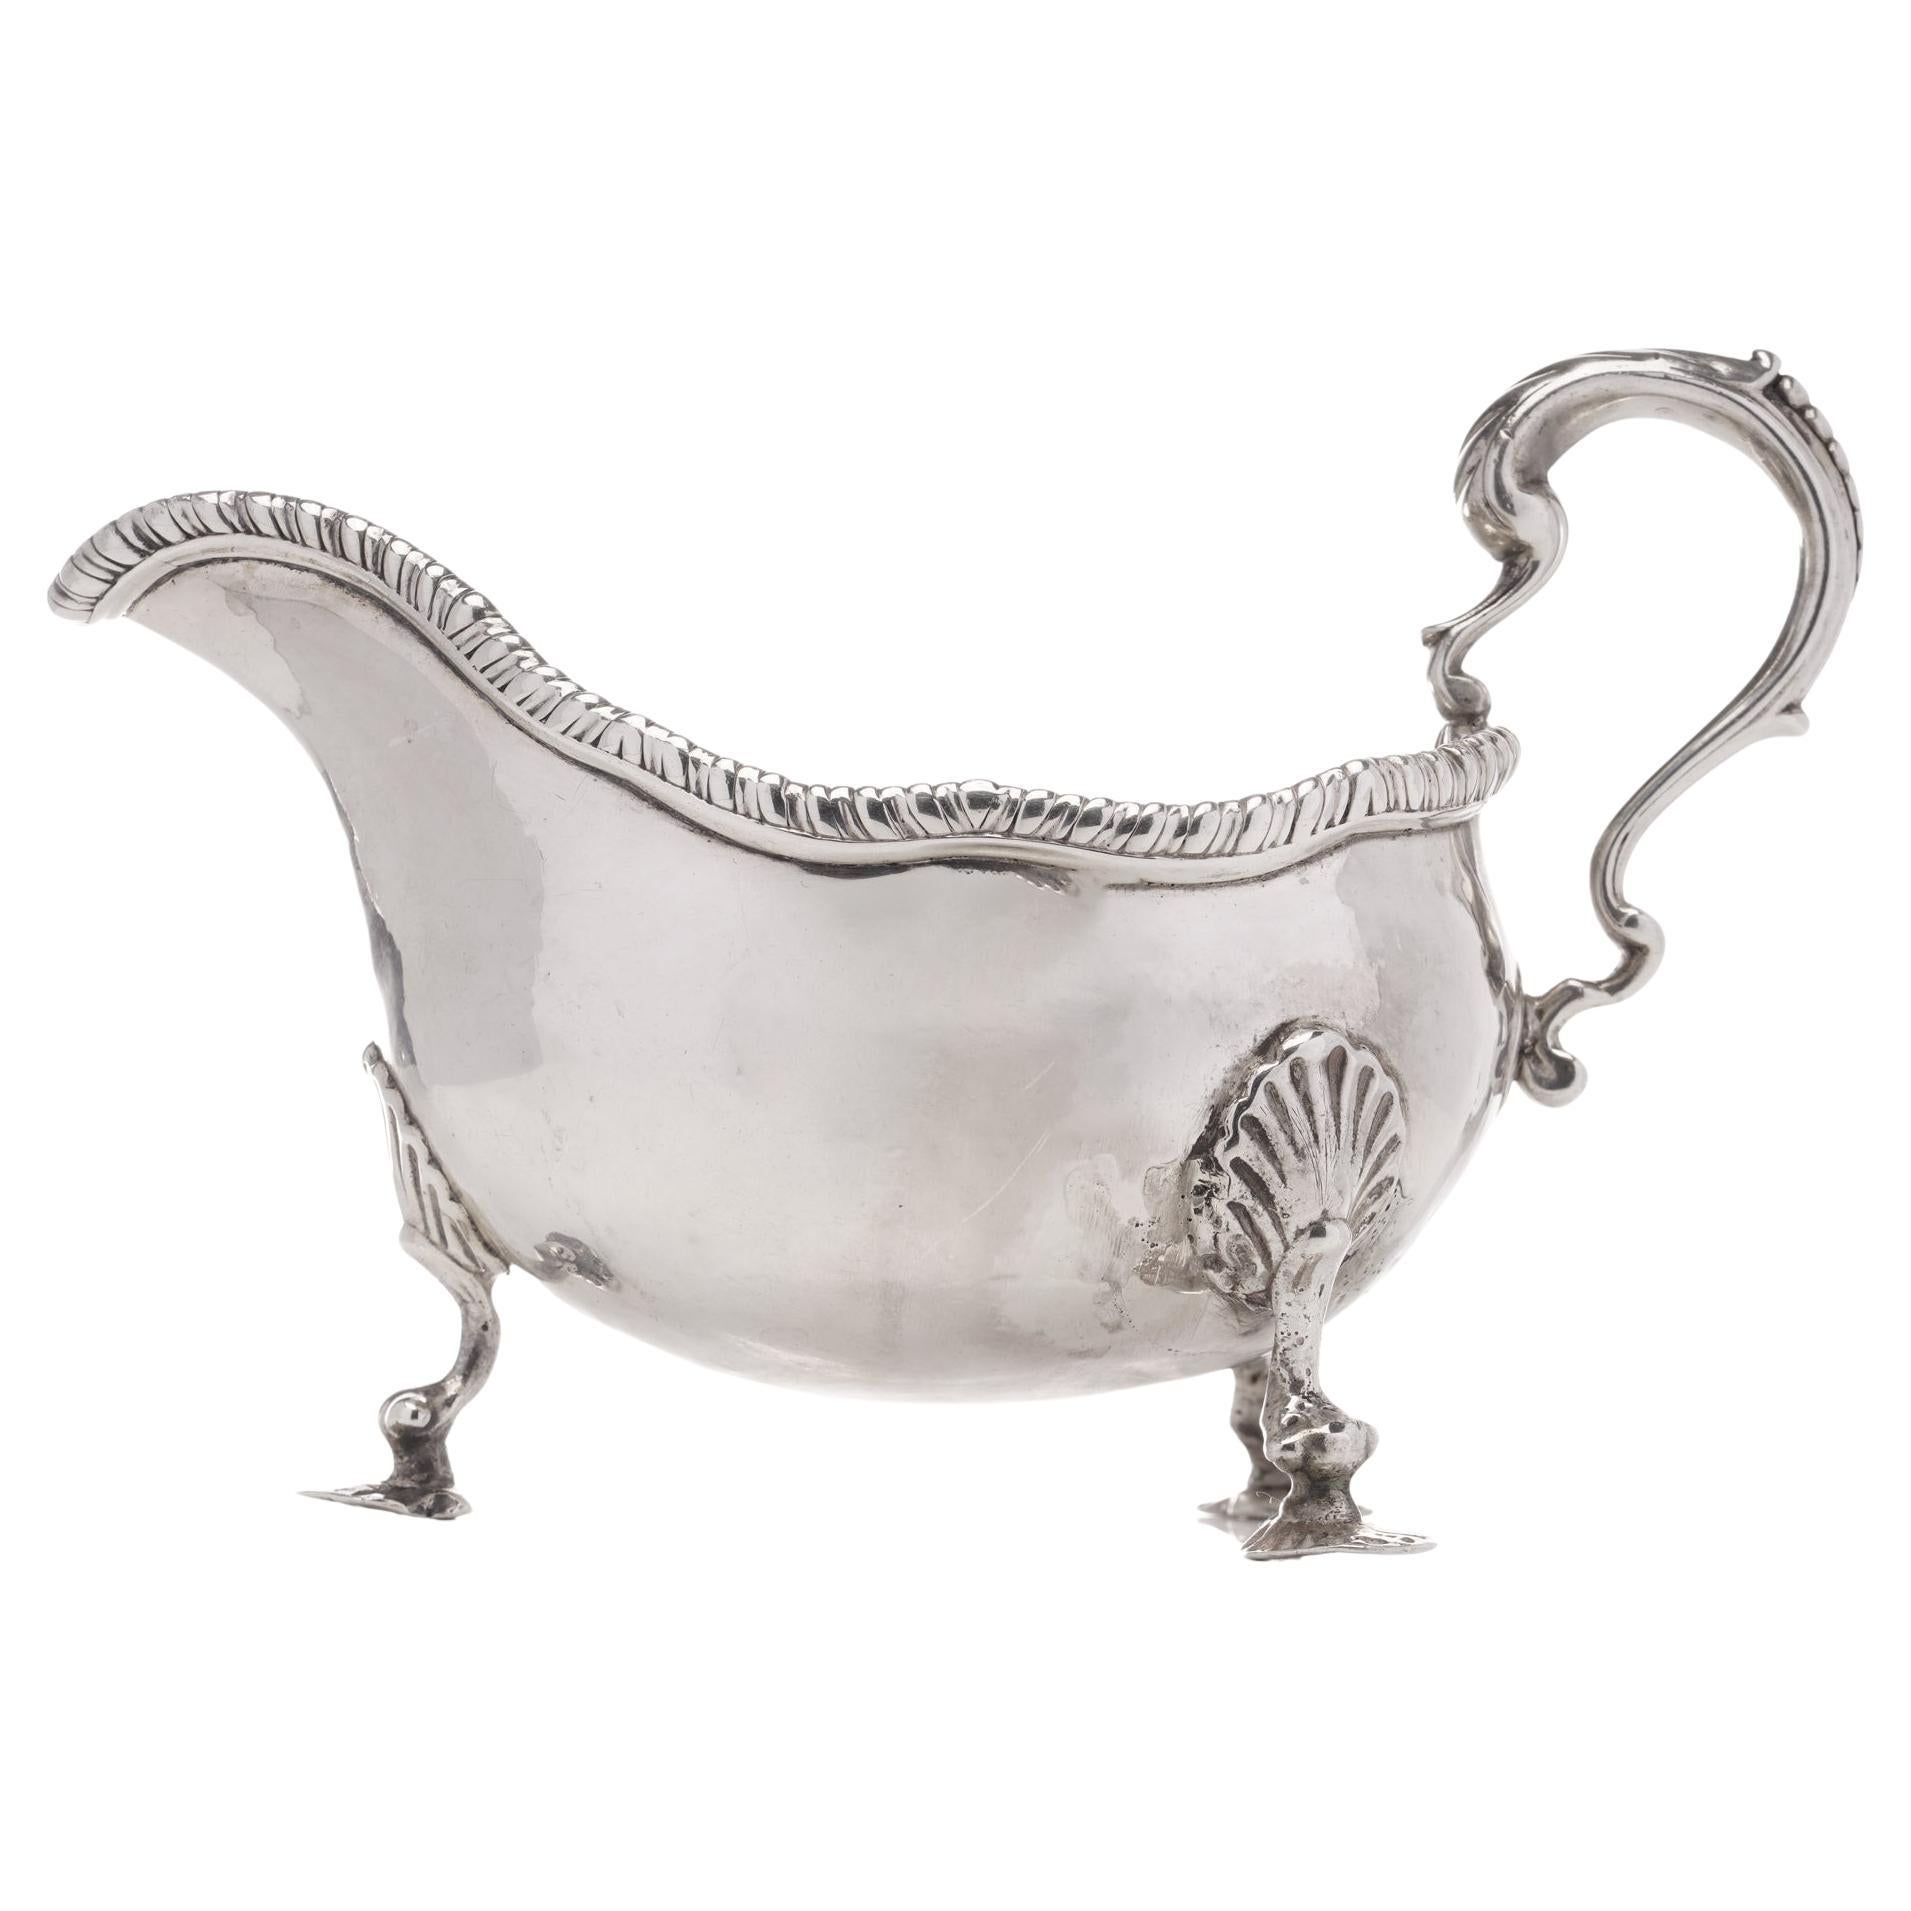 Antique Georgian sterling silver chased sauce boat with elaborate decorations